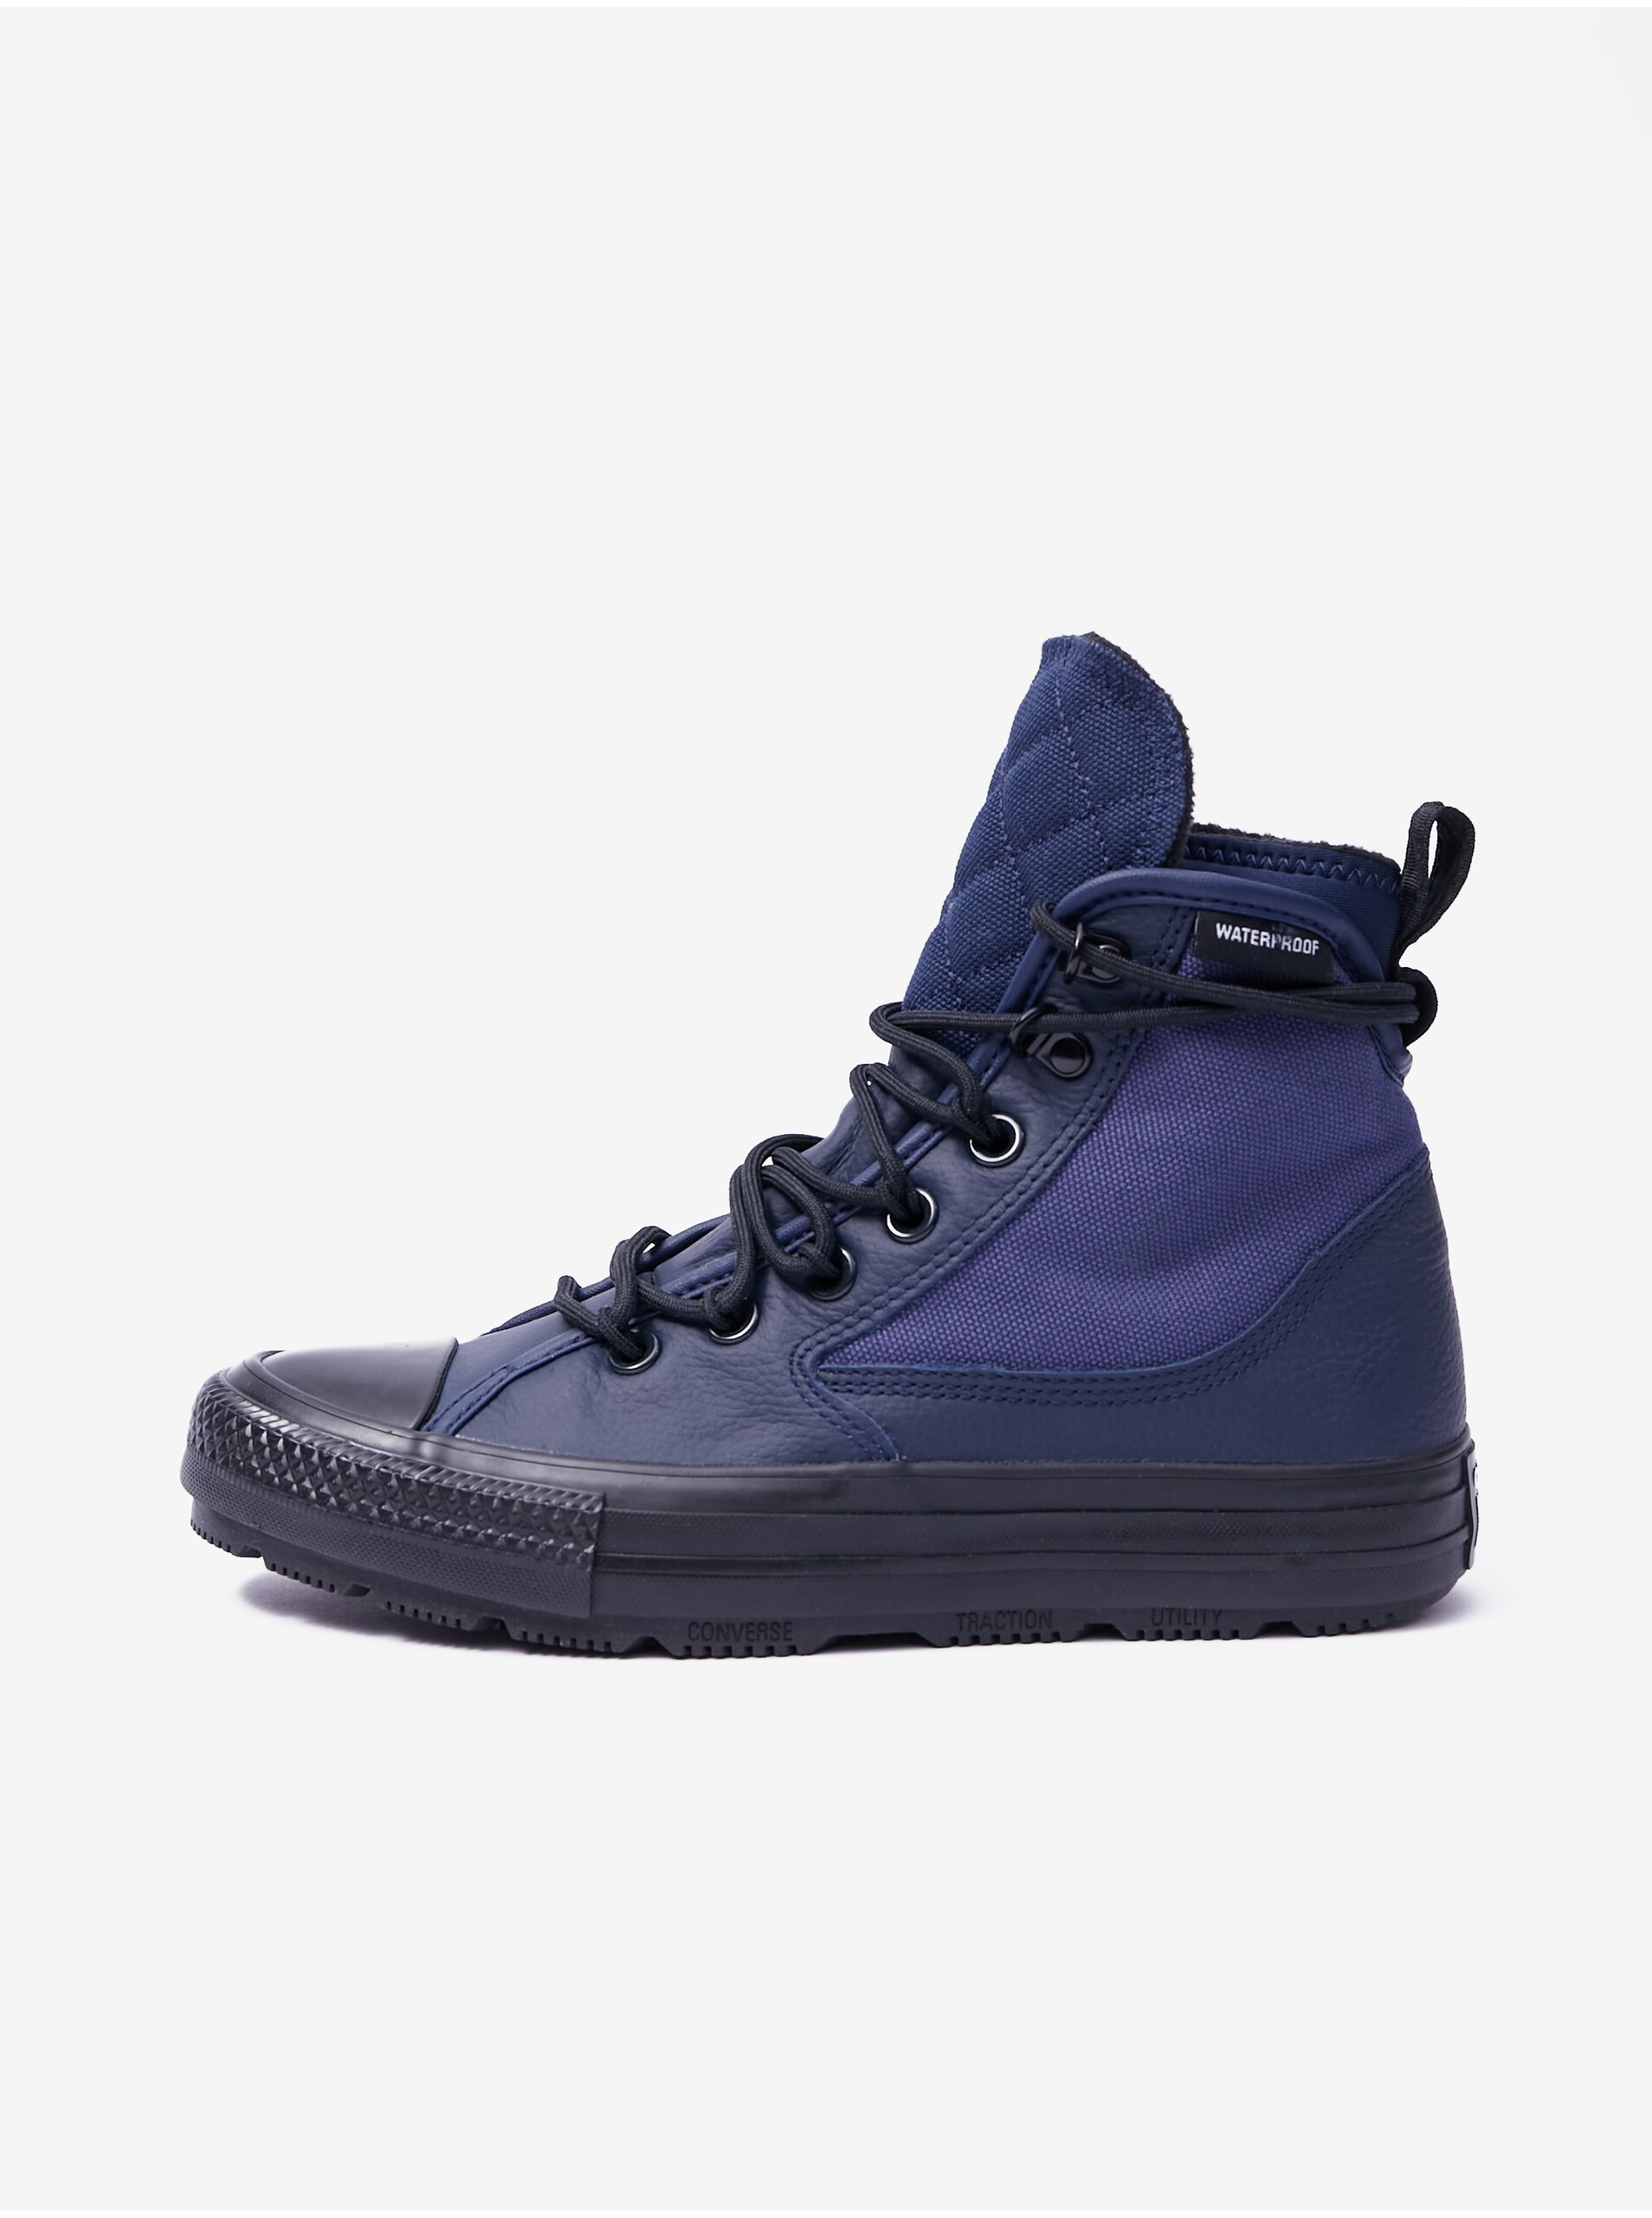 Dark blue ankle sneakers with leather details Converse Chuck Taylo - Women